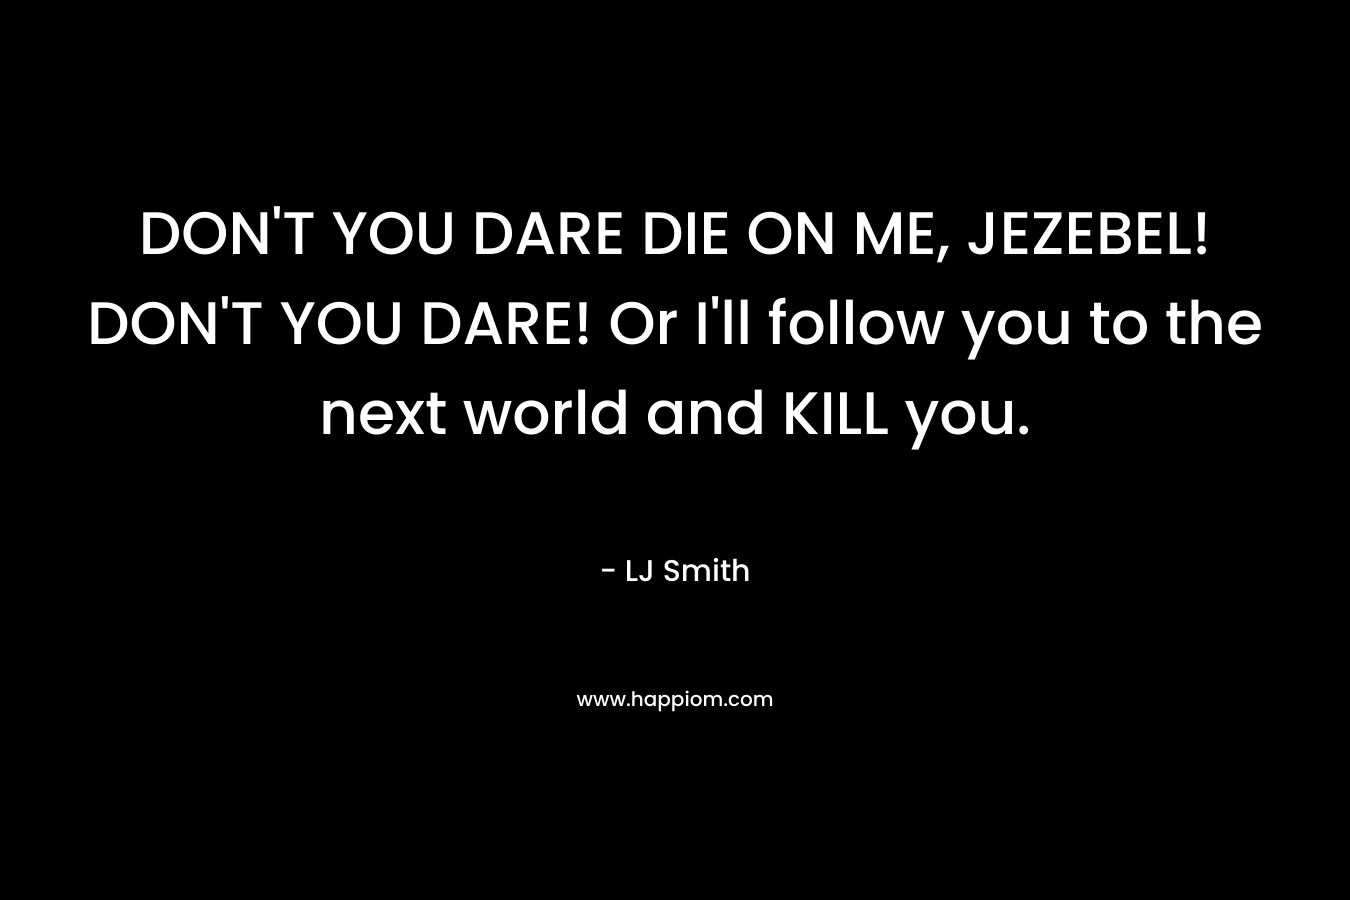 DON'T YOU DARE DIE ON ME, JEZEBEL! DON'T YOU DARE! Or I'll follow you to the next world and KILL you.